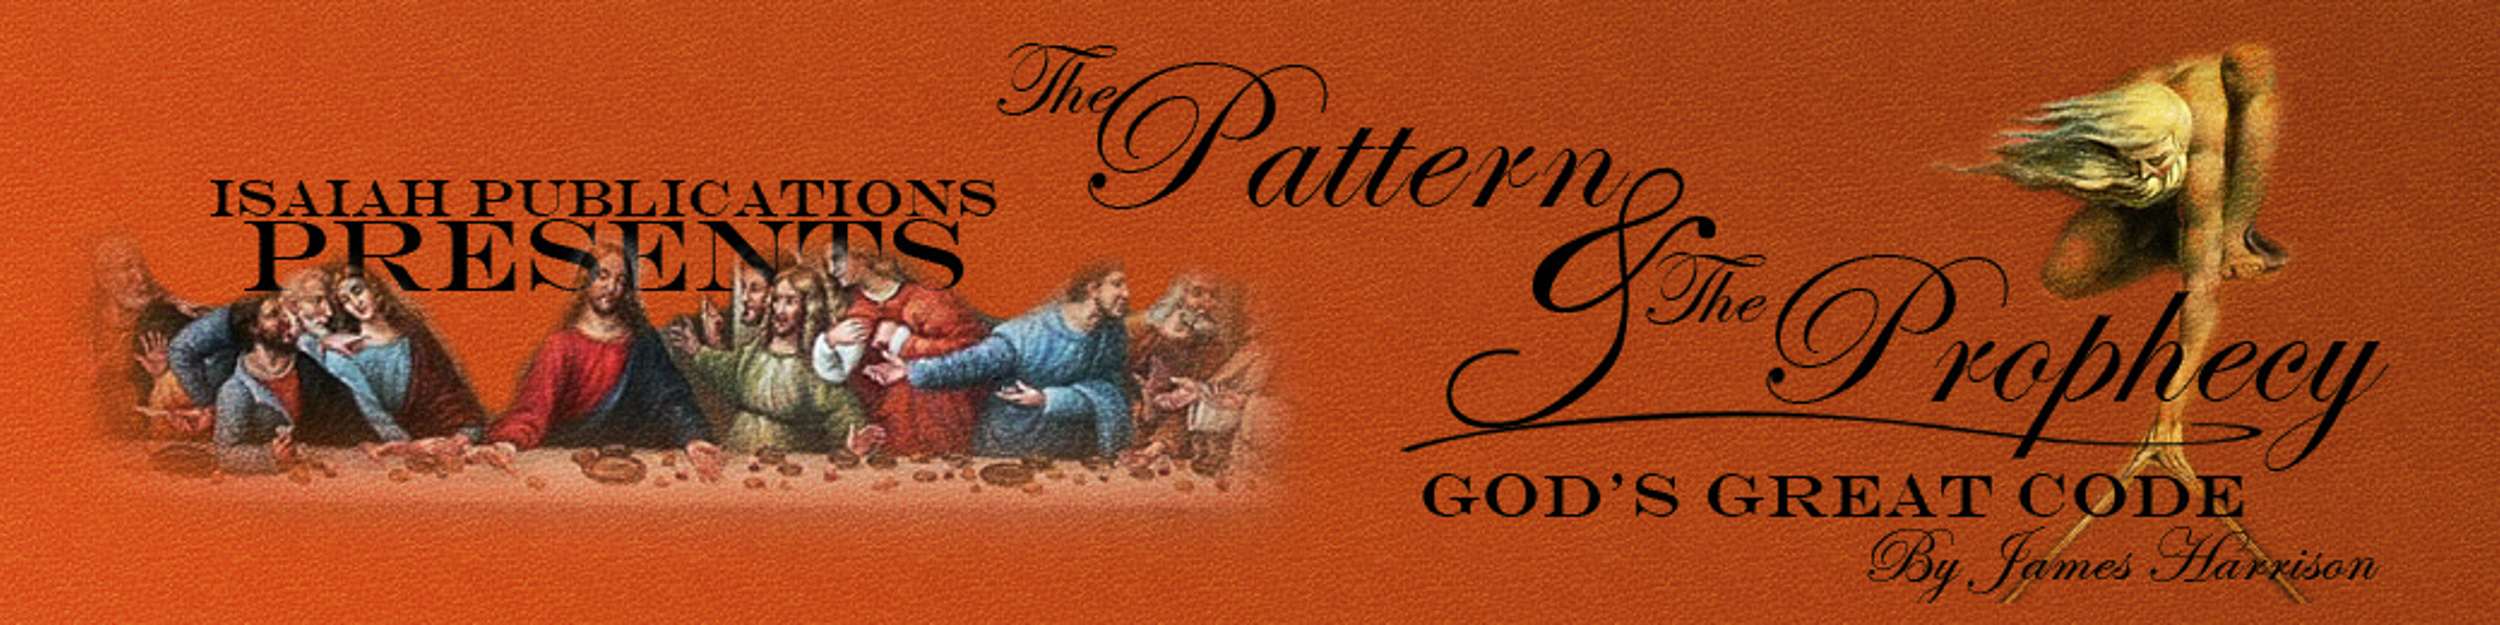 eBook The Pattern & The Prophecy God’s Great Code Bible Codes